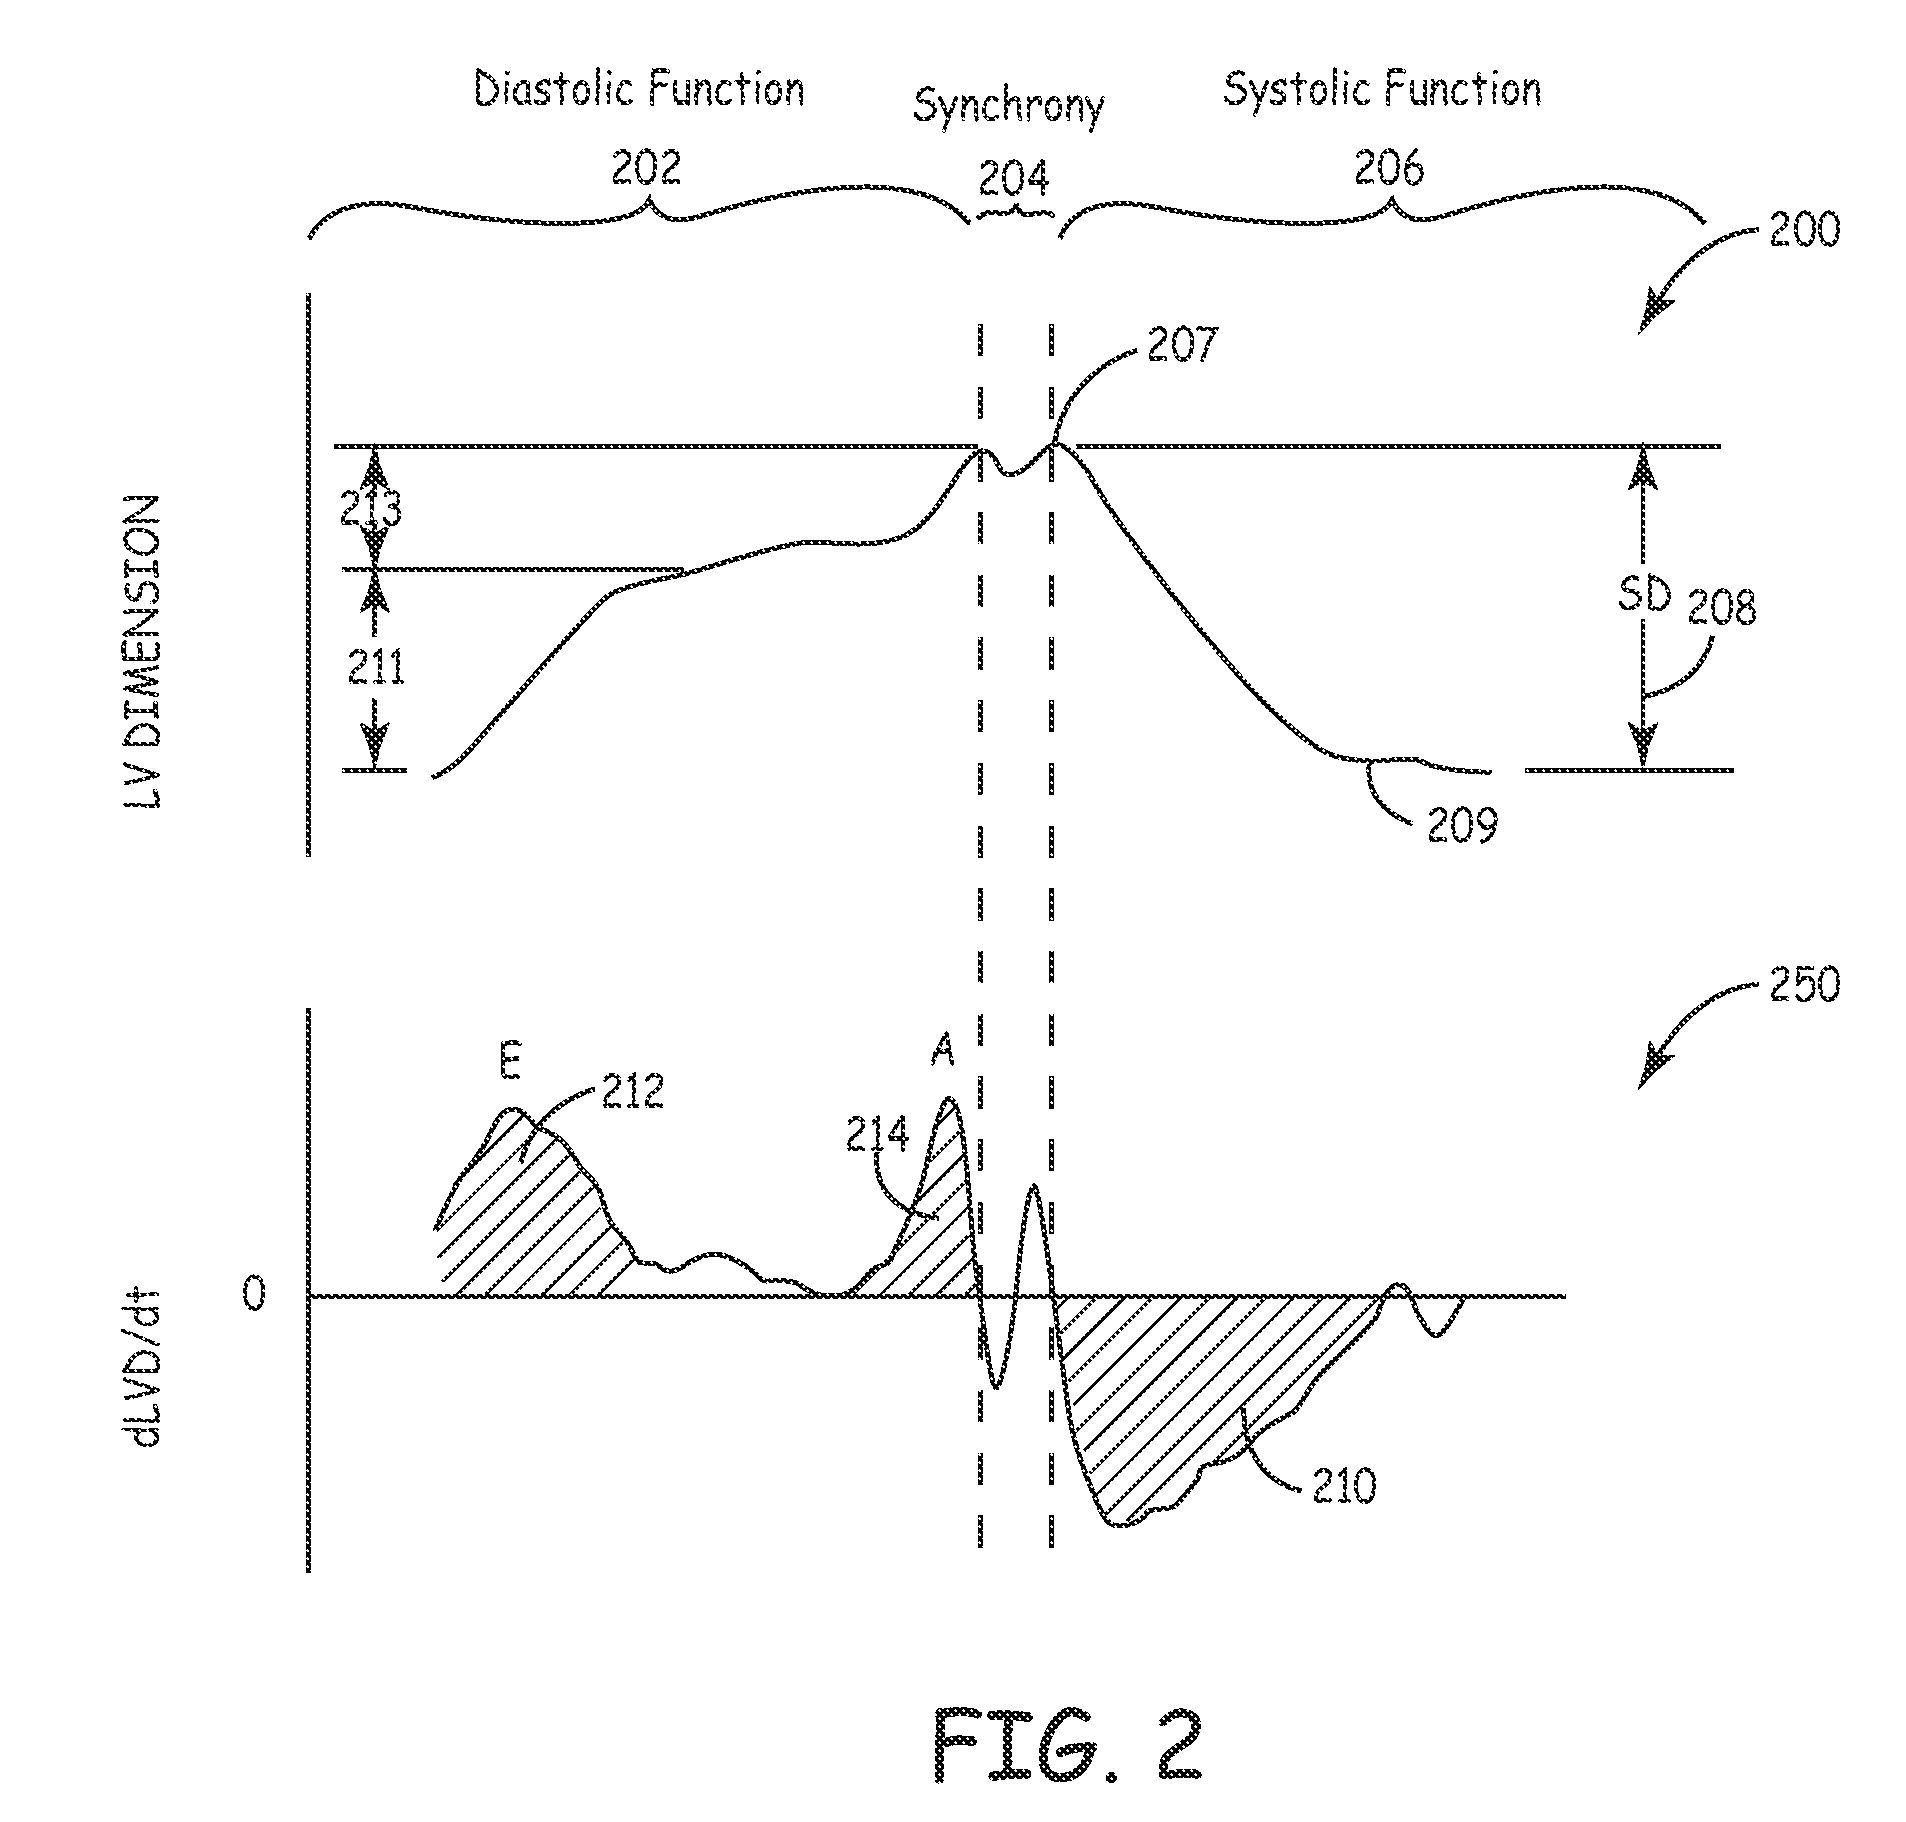 System and method for improving pacing parameters using acute hemodynamic feedback during device implant